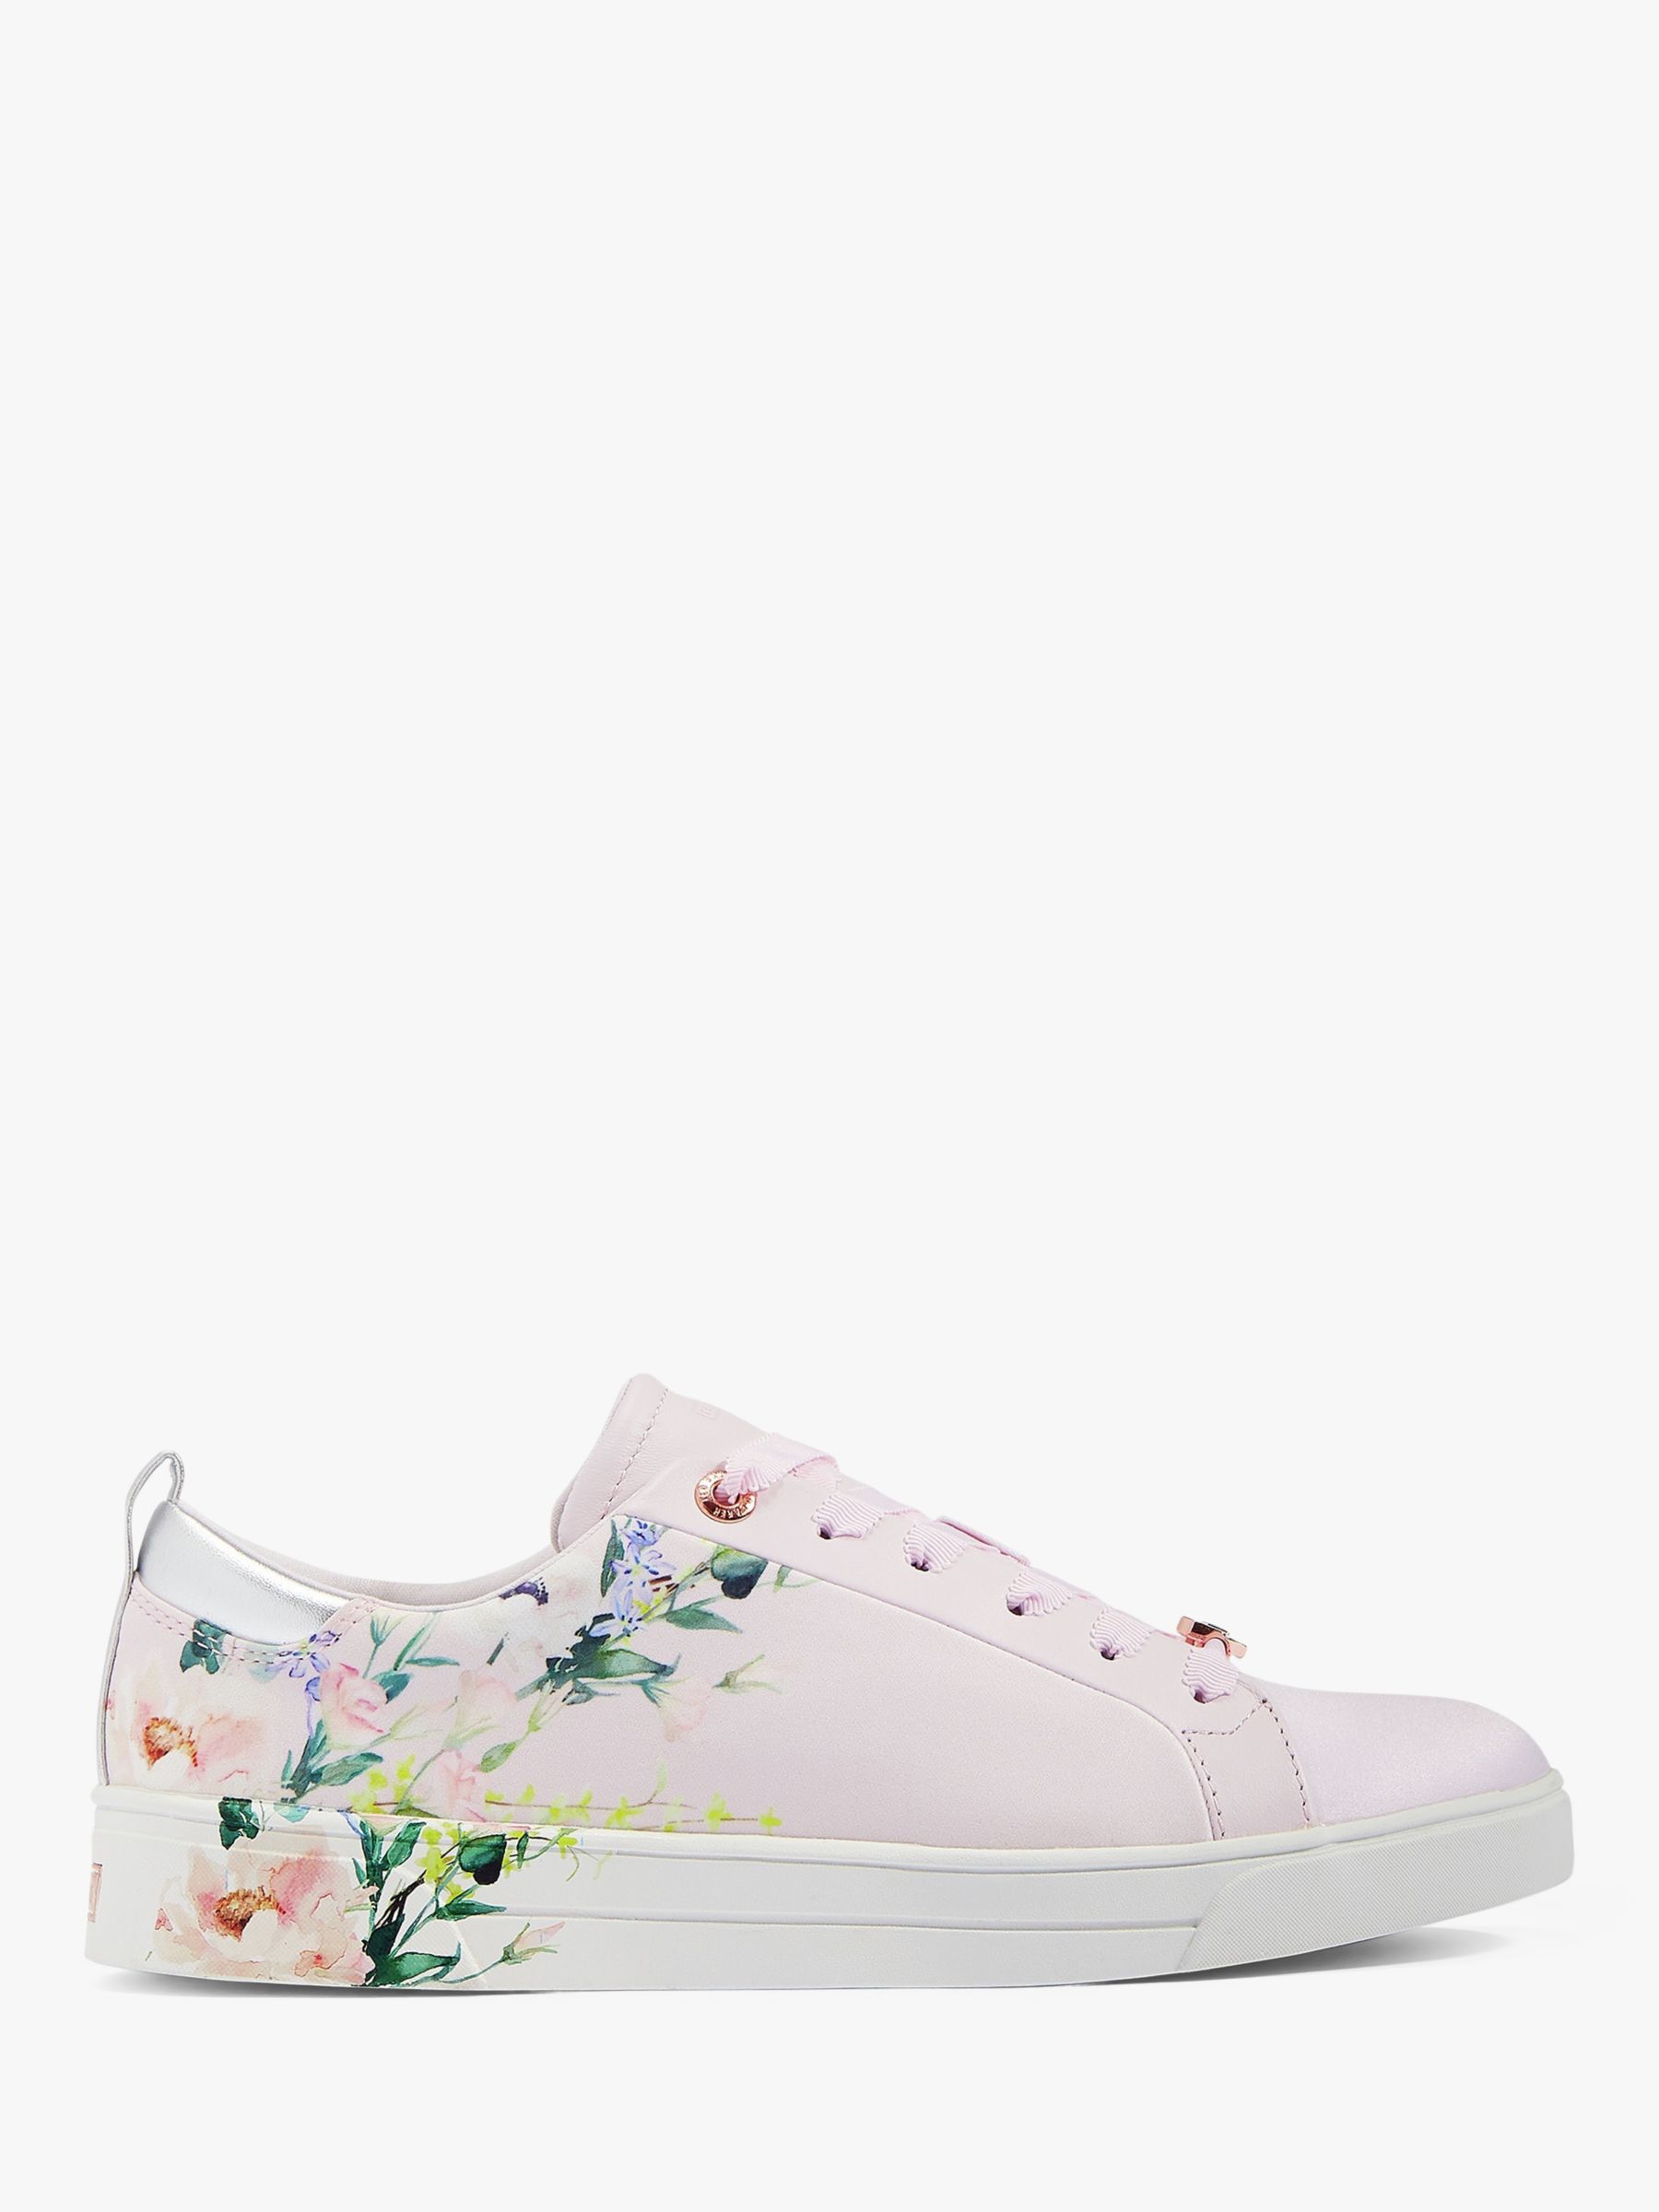 ted baker trainers sale uk